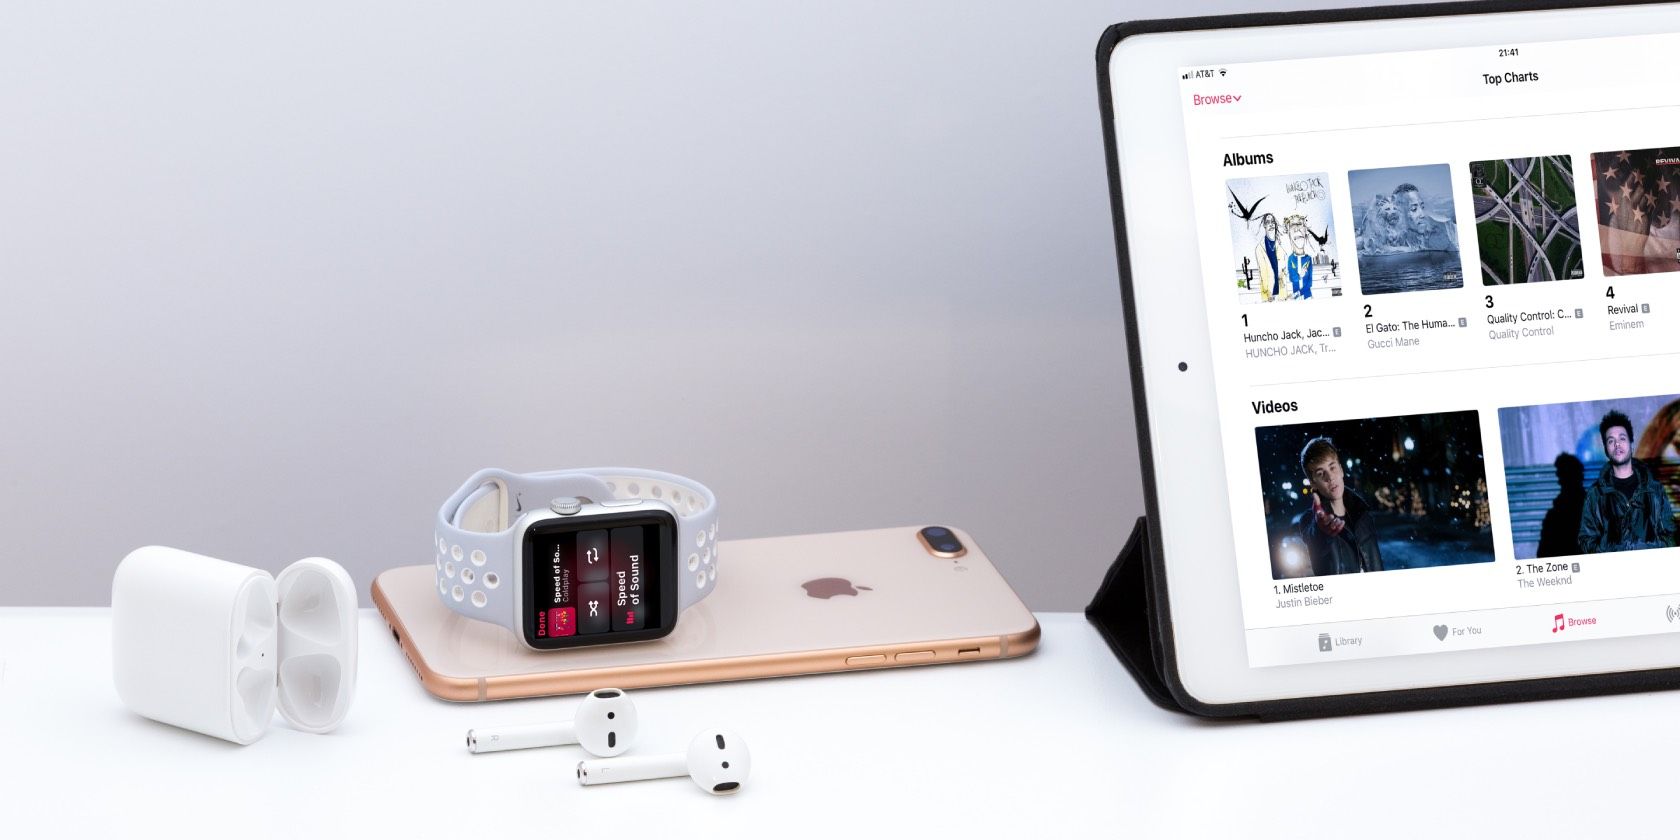 iPad, Apple Watch, and AirPods with Apple Music